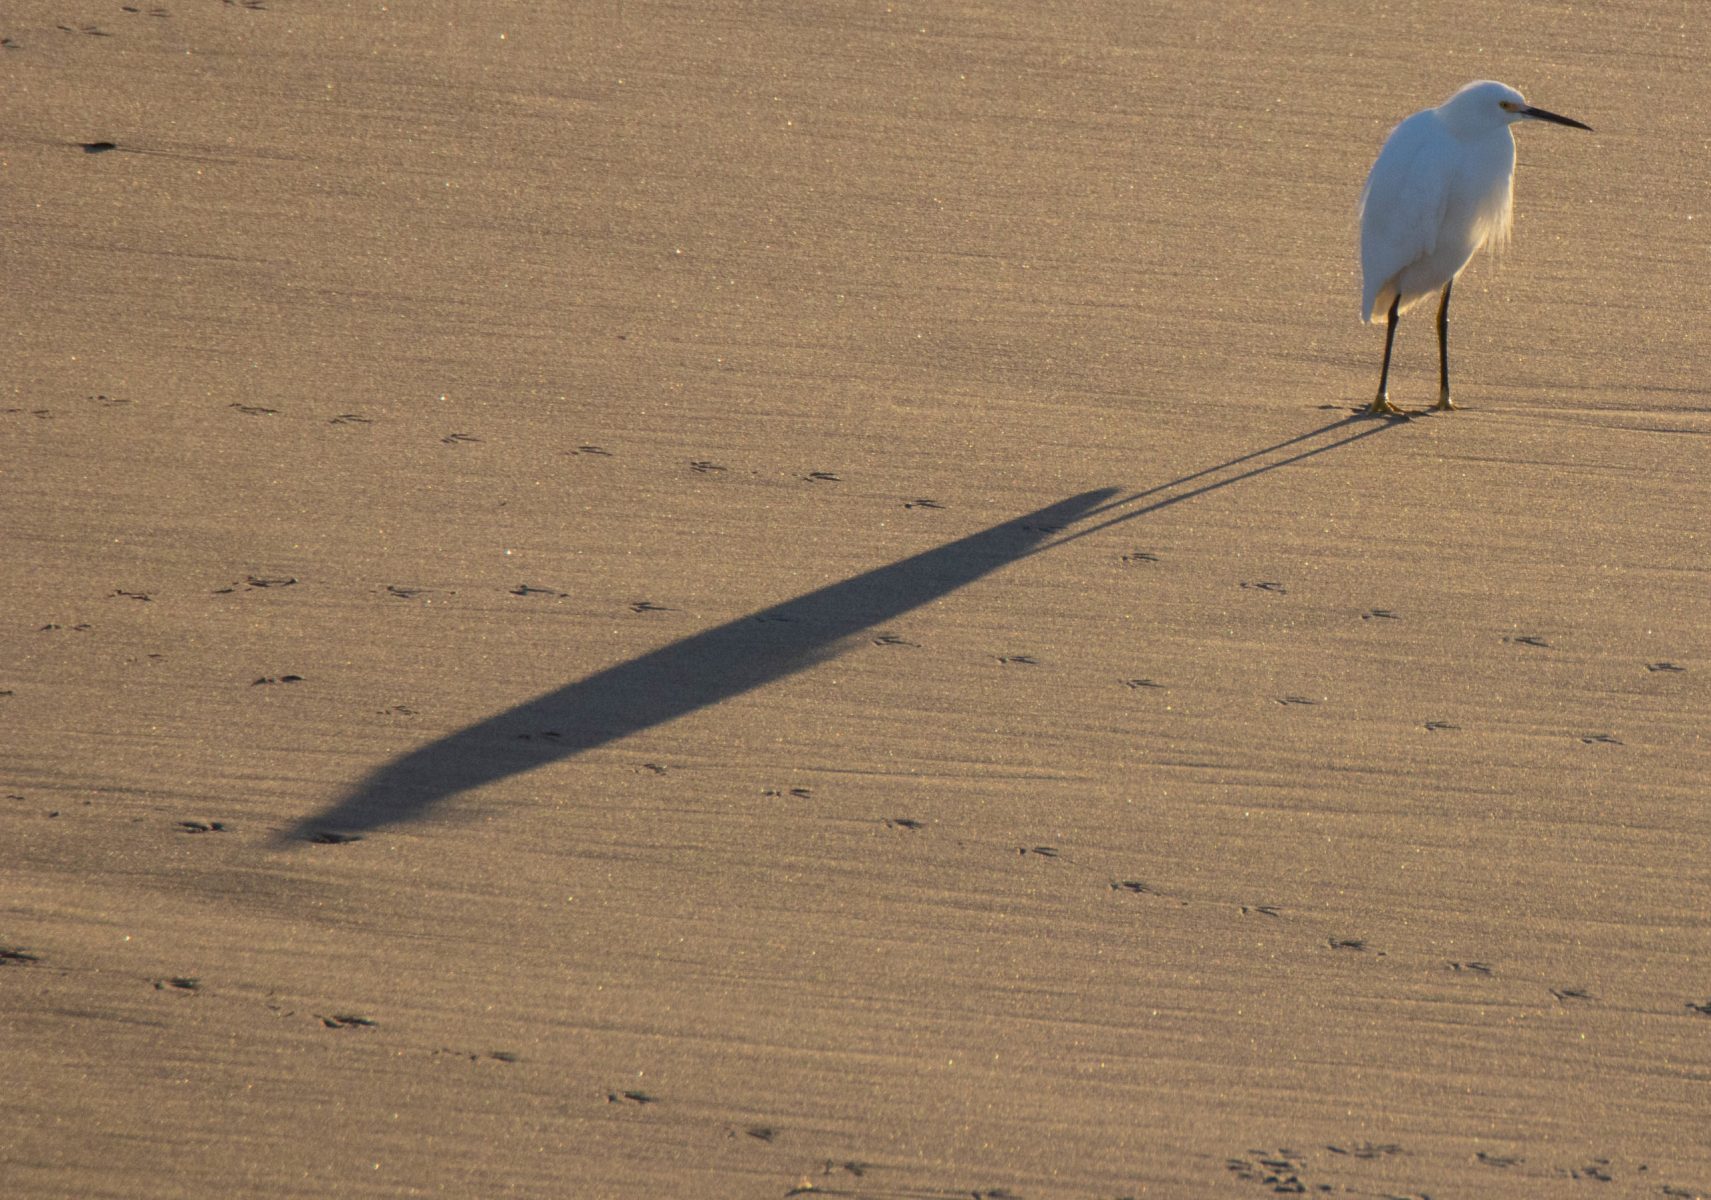 Snowy Egret and shadow at the beach.